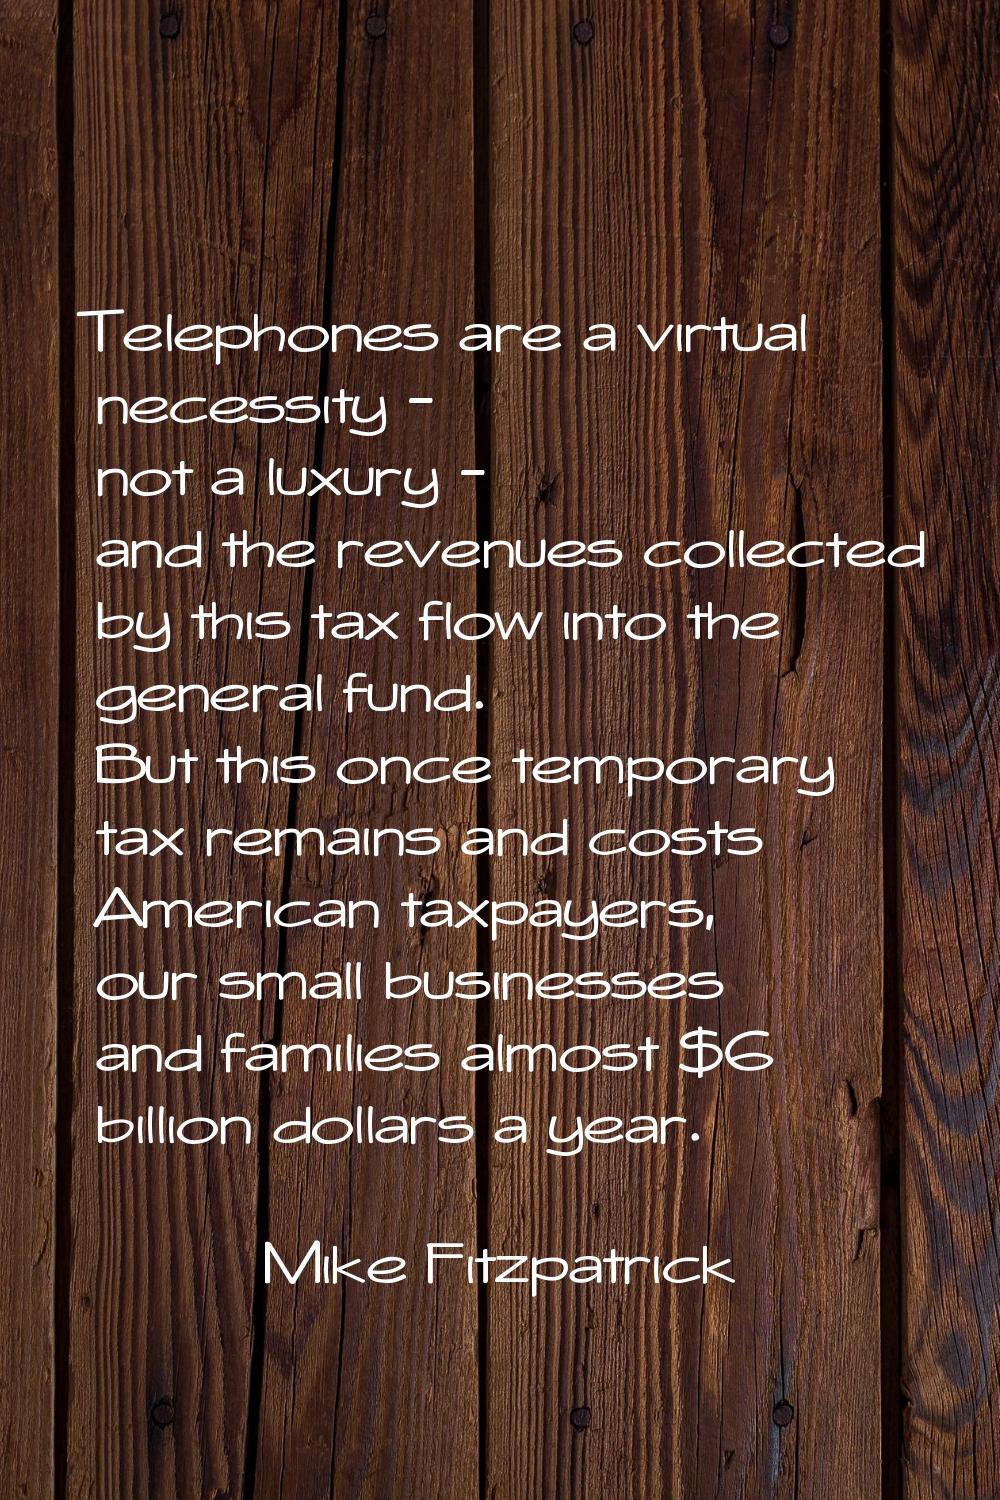 Telephones are a virtual necessity - not a luxury - and the revenues collected by this tax flow int